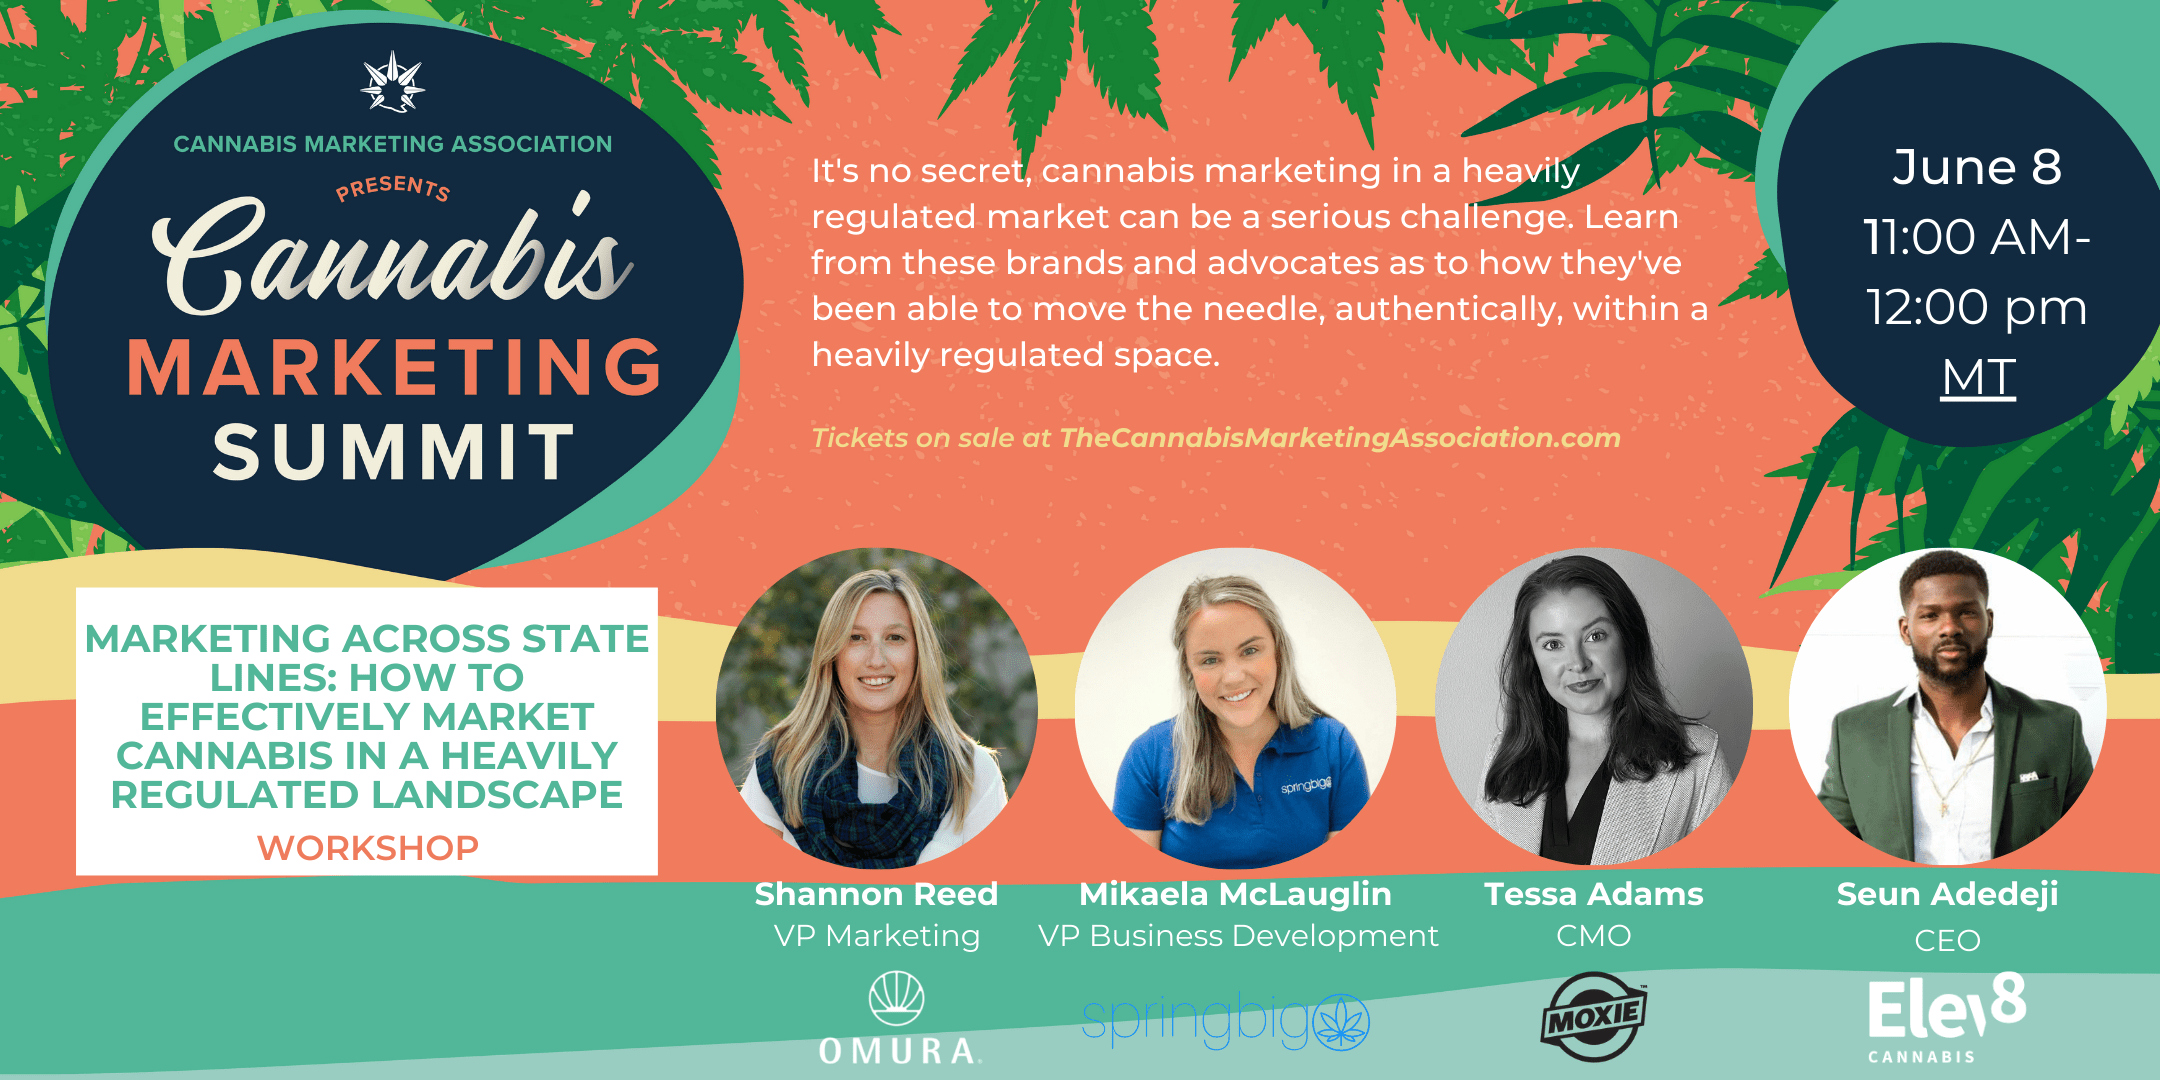 Session Spotlight: Marketing Across State Lines: How to Effectively Market Cannabis in a Heavily Regulated Landscape